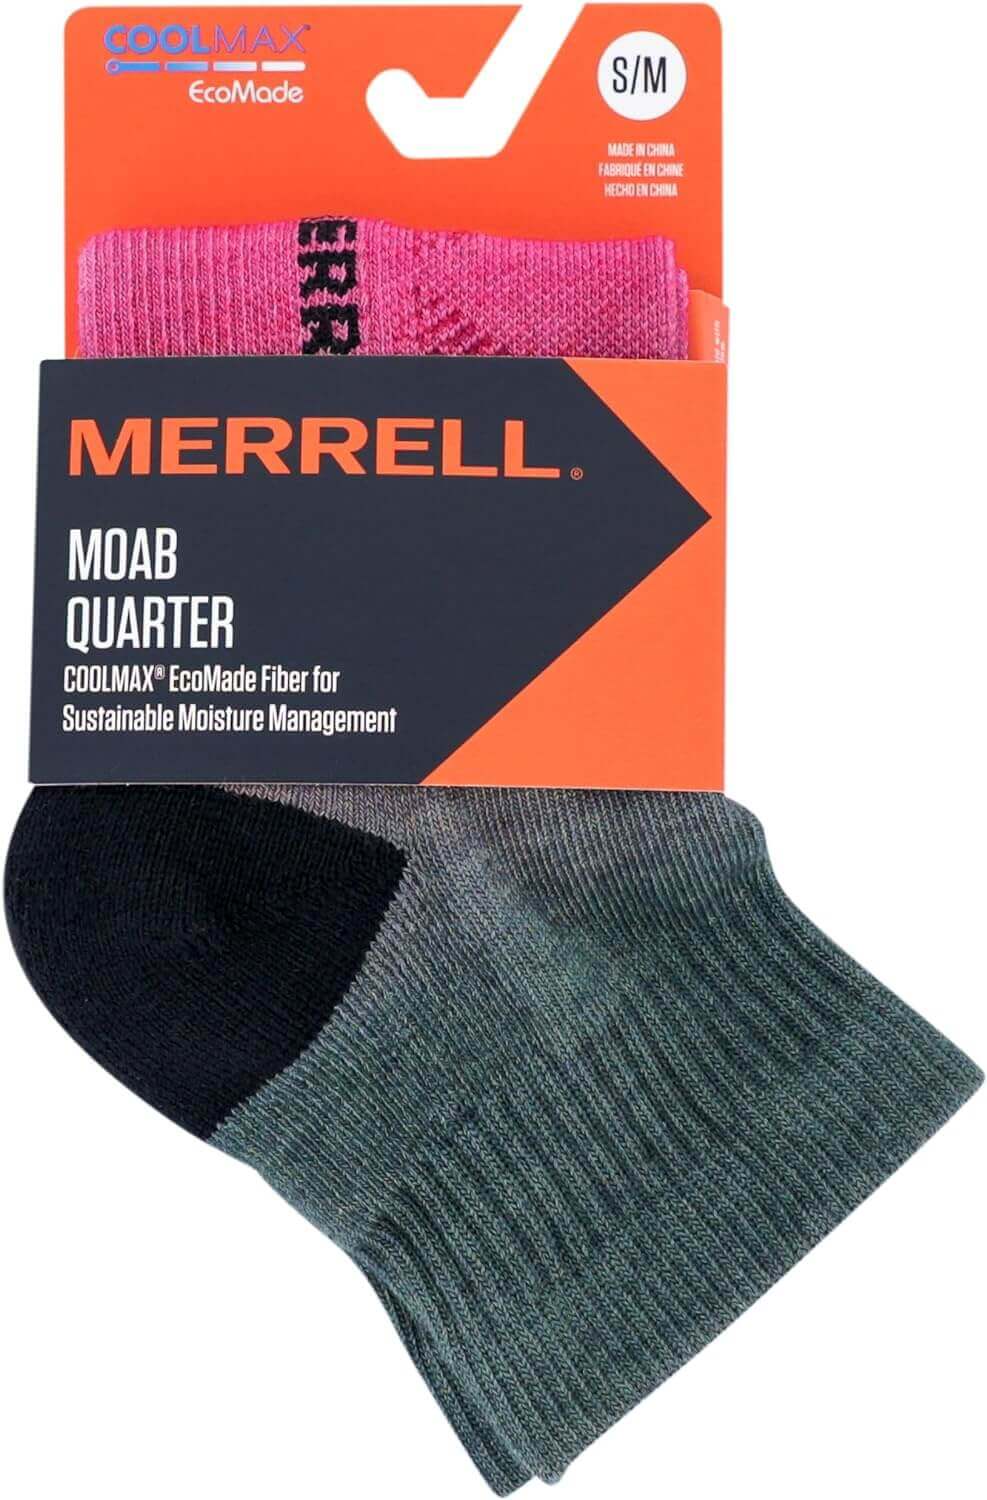 Shop The Latest >Merrell Men's and Women's Moab Hiking Mid Cushion Socks > *Only $19.56*> From The Top Brand > *Merrelll* > Shop Now and Get Free Shipping On Orders Over $45.00 >*Shop Earth Foot*